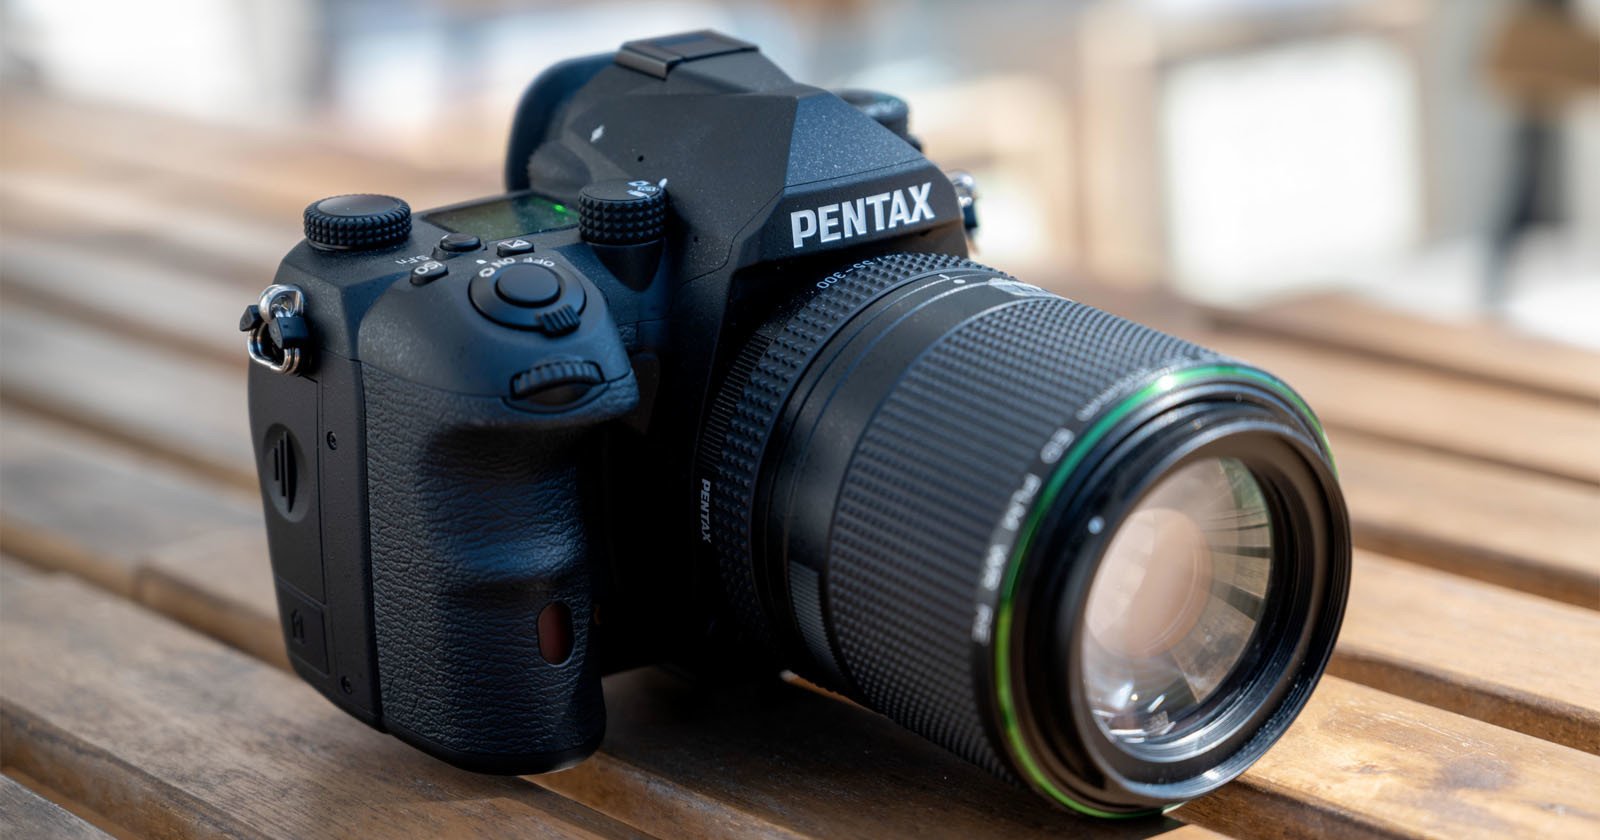 Pentax May Have Lucked Out as Nikon and Canon Leave DSLRs Behind